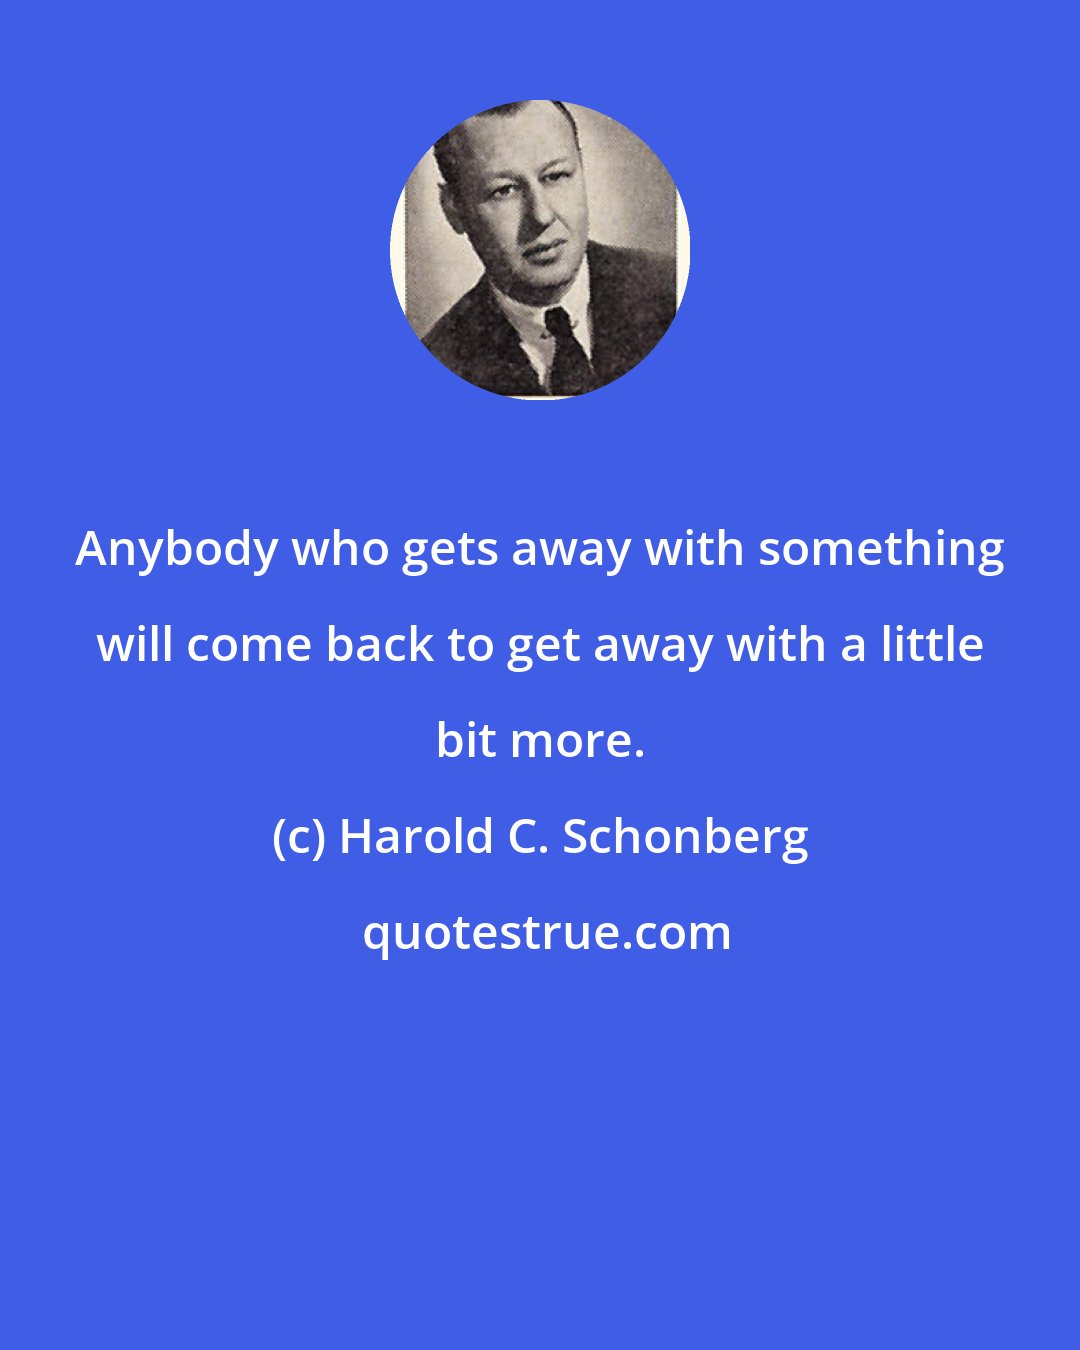 Harold C. Schonberg: Anybody who gets away with something will come back to get away with a little bit more.